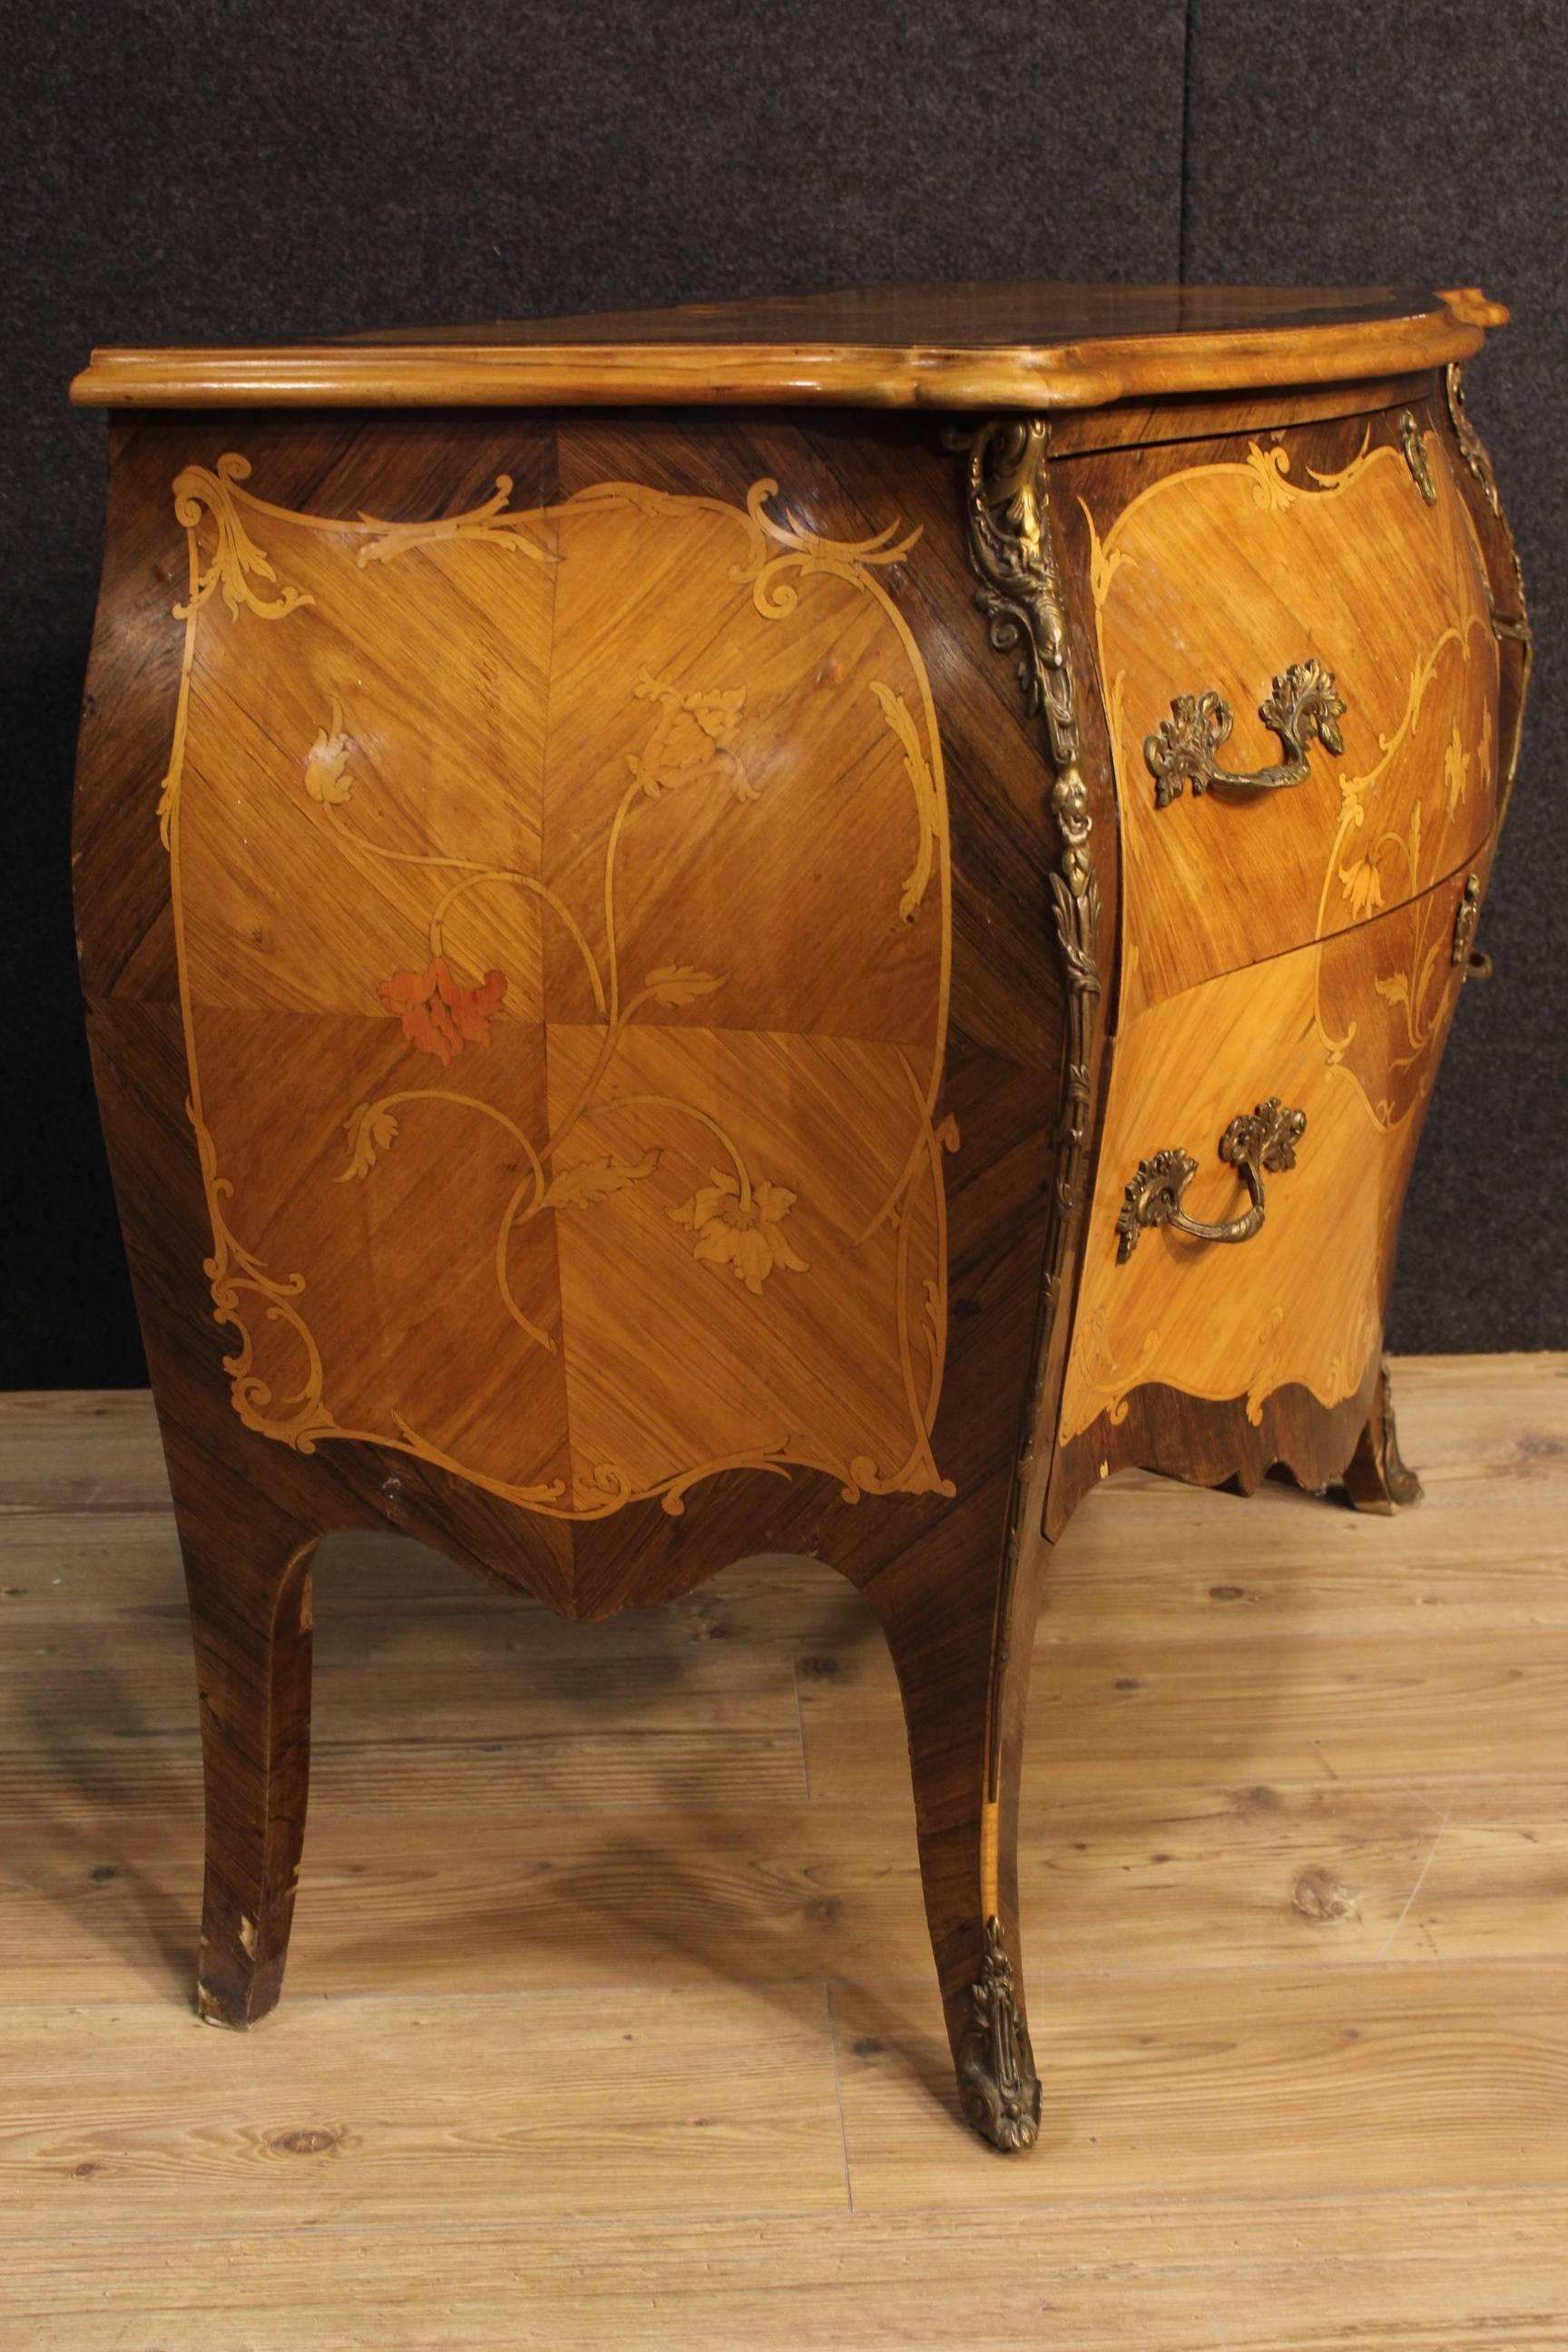 Elegant Italian dresser of the 20th century. Furniture nicely inlaid with floral decorations in rosewood, palisander, mahogany, maple and fruit woods of beautiful line and good taste. Dresser curved and moved adorned with chiseled bronzes of